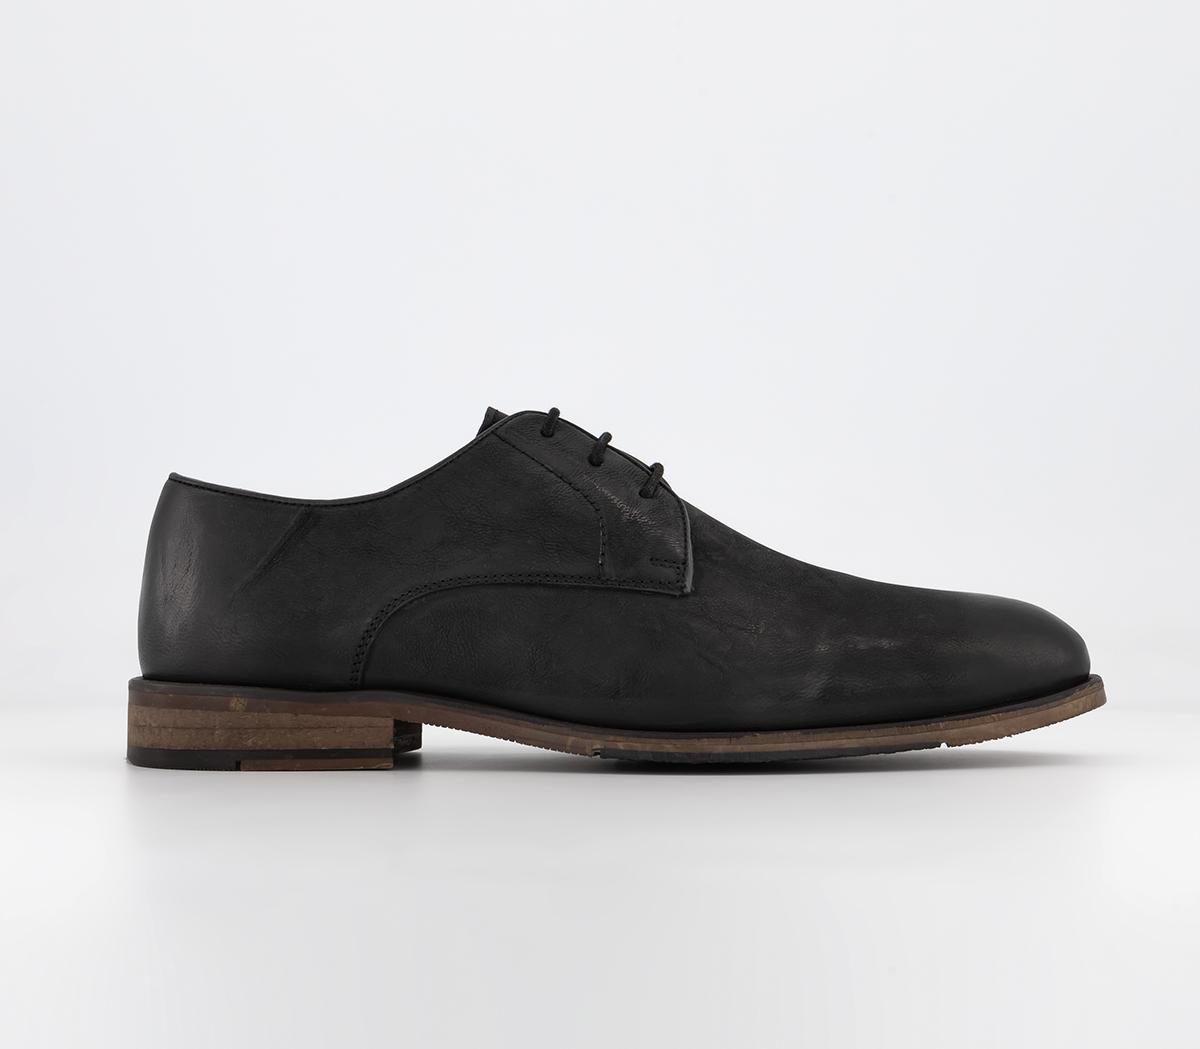 OFFICECurtis Washed Leather Derby ShoesBlack Leather